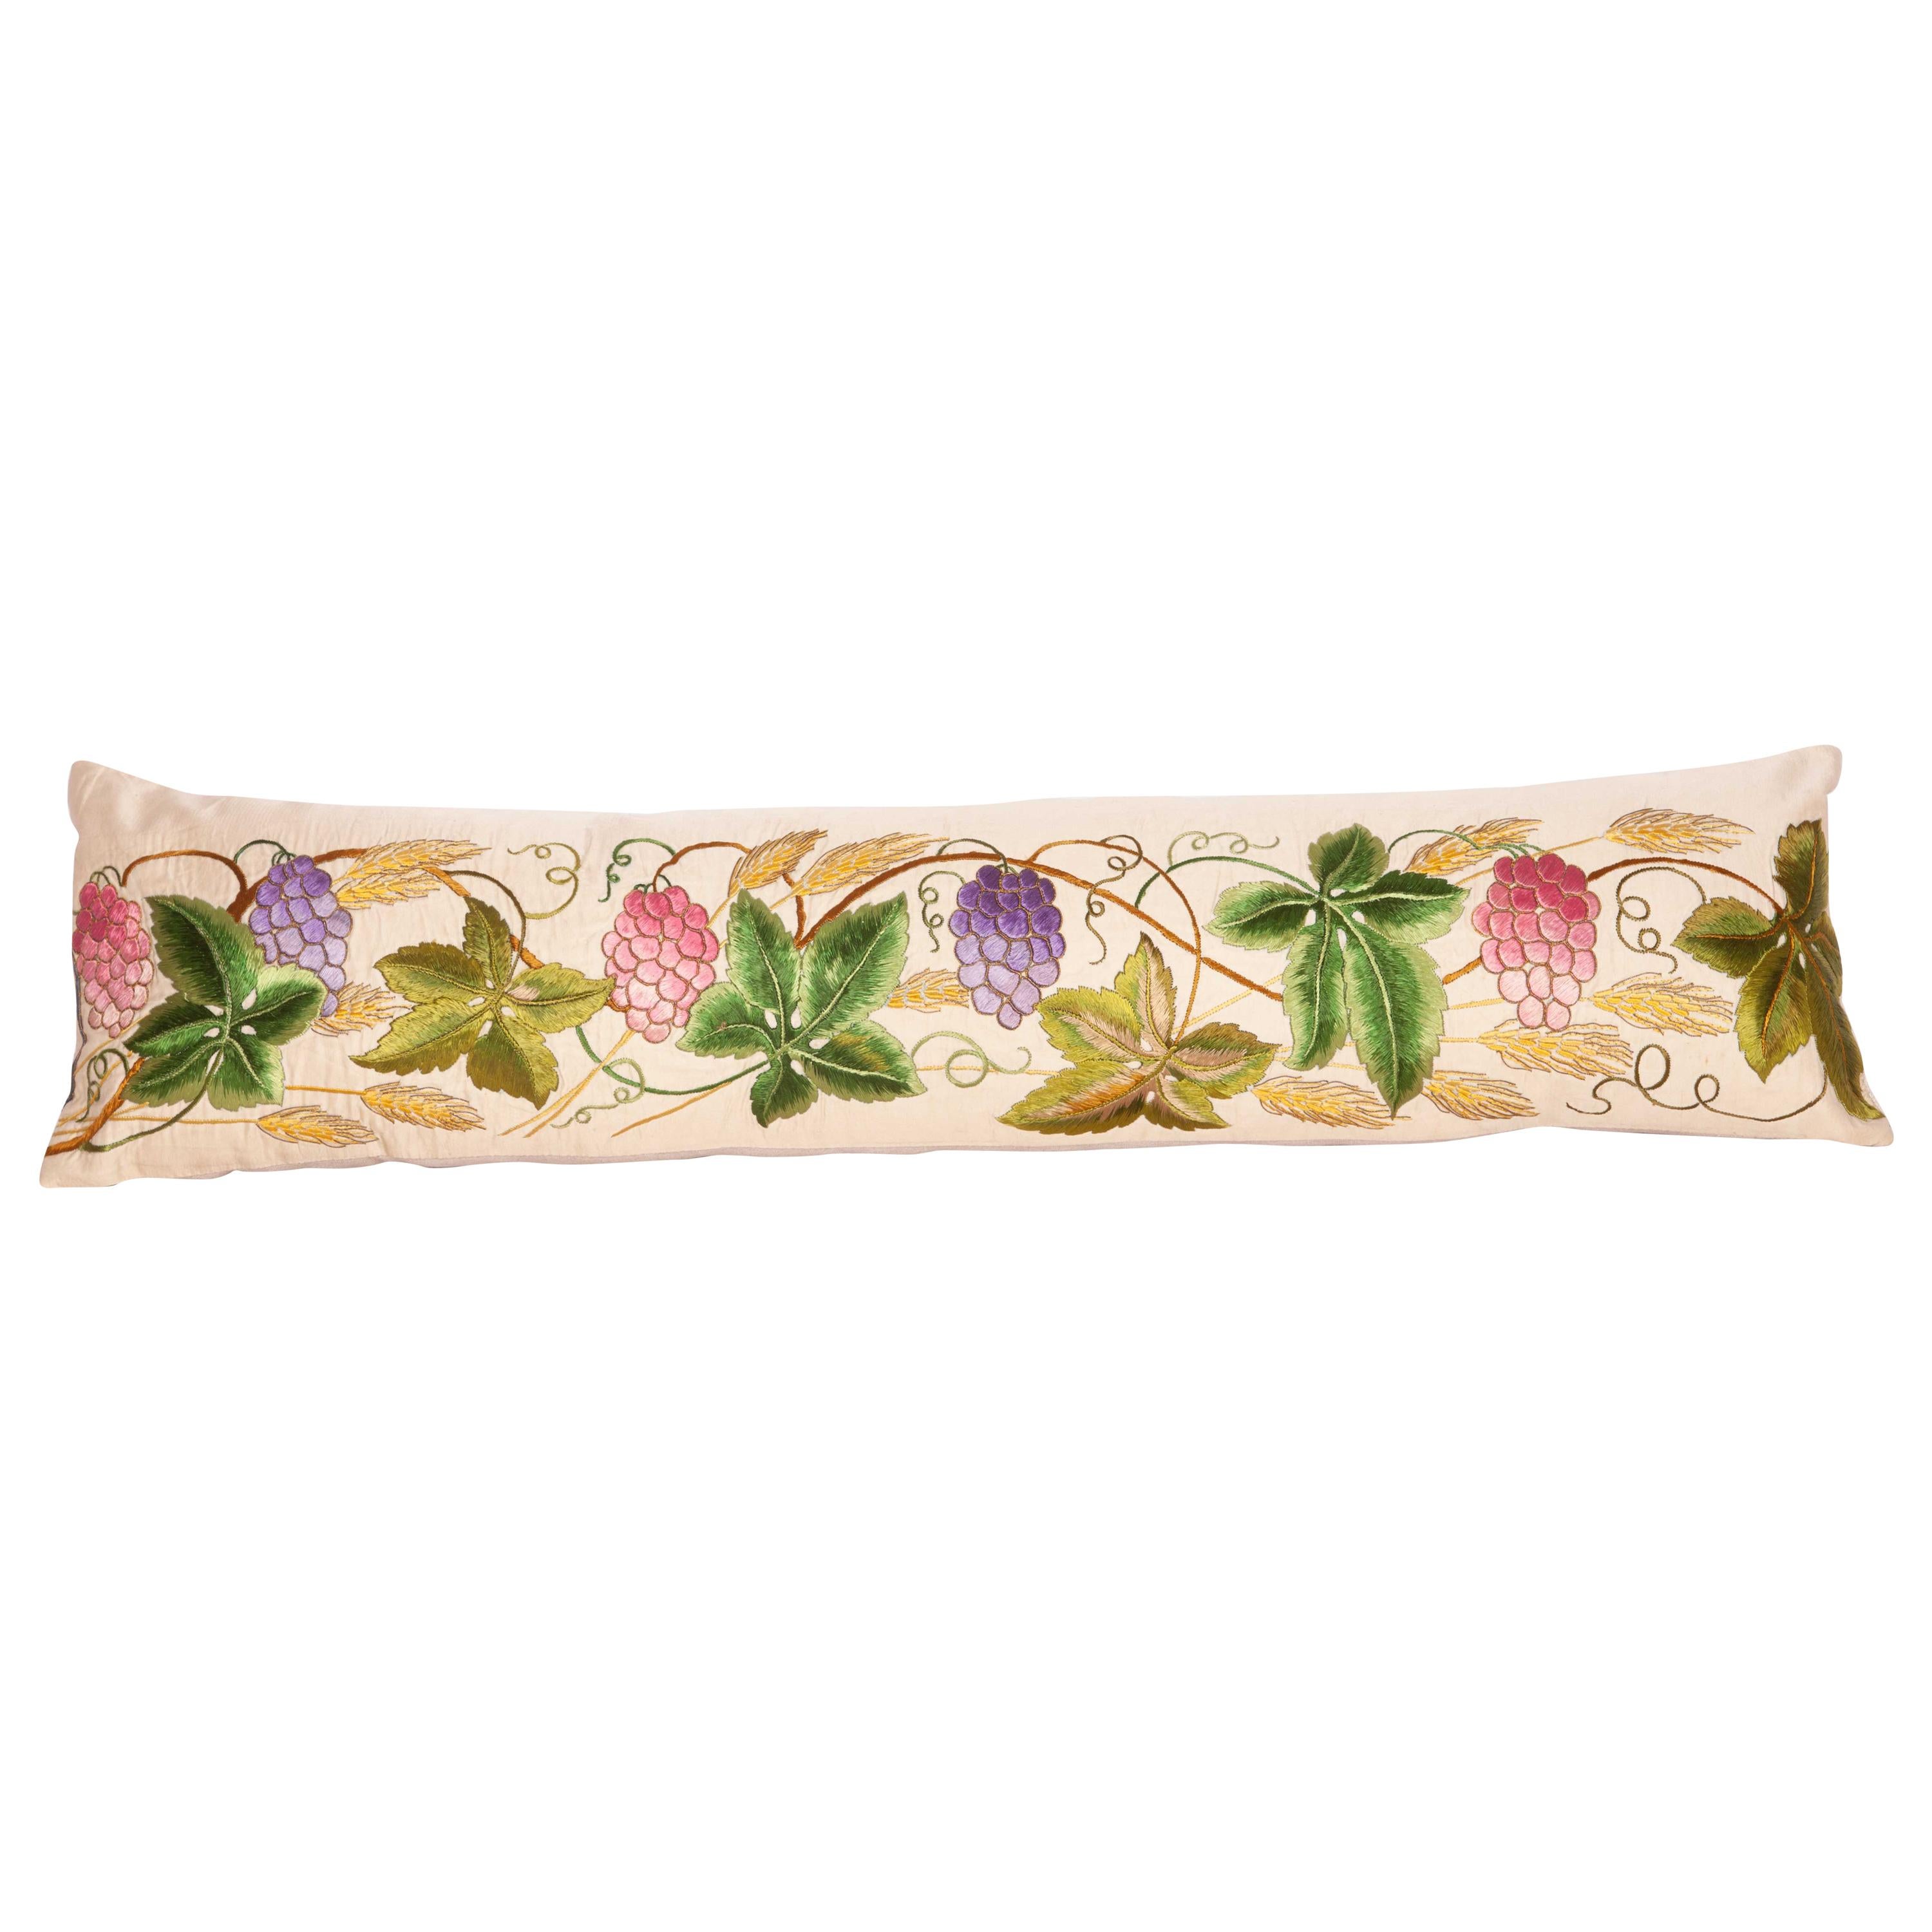 Antique Lumbar Pillow Case Made from an 18th-19th Century, European Embroidery